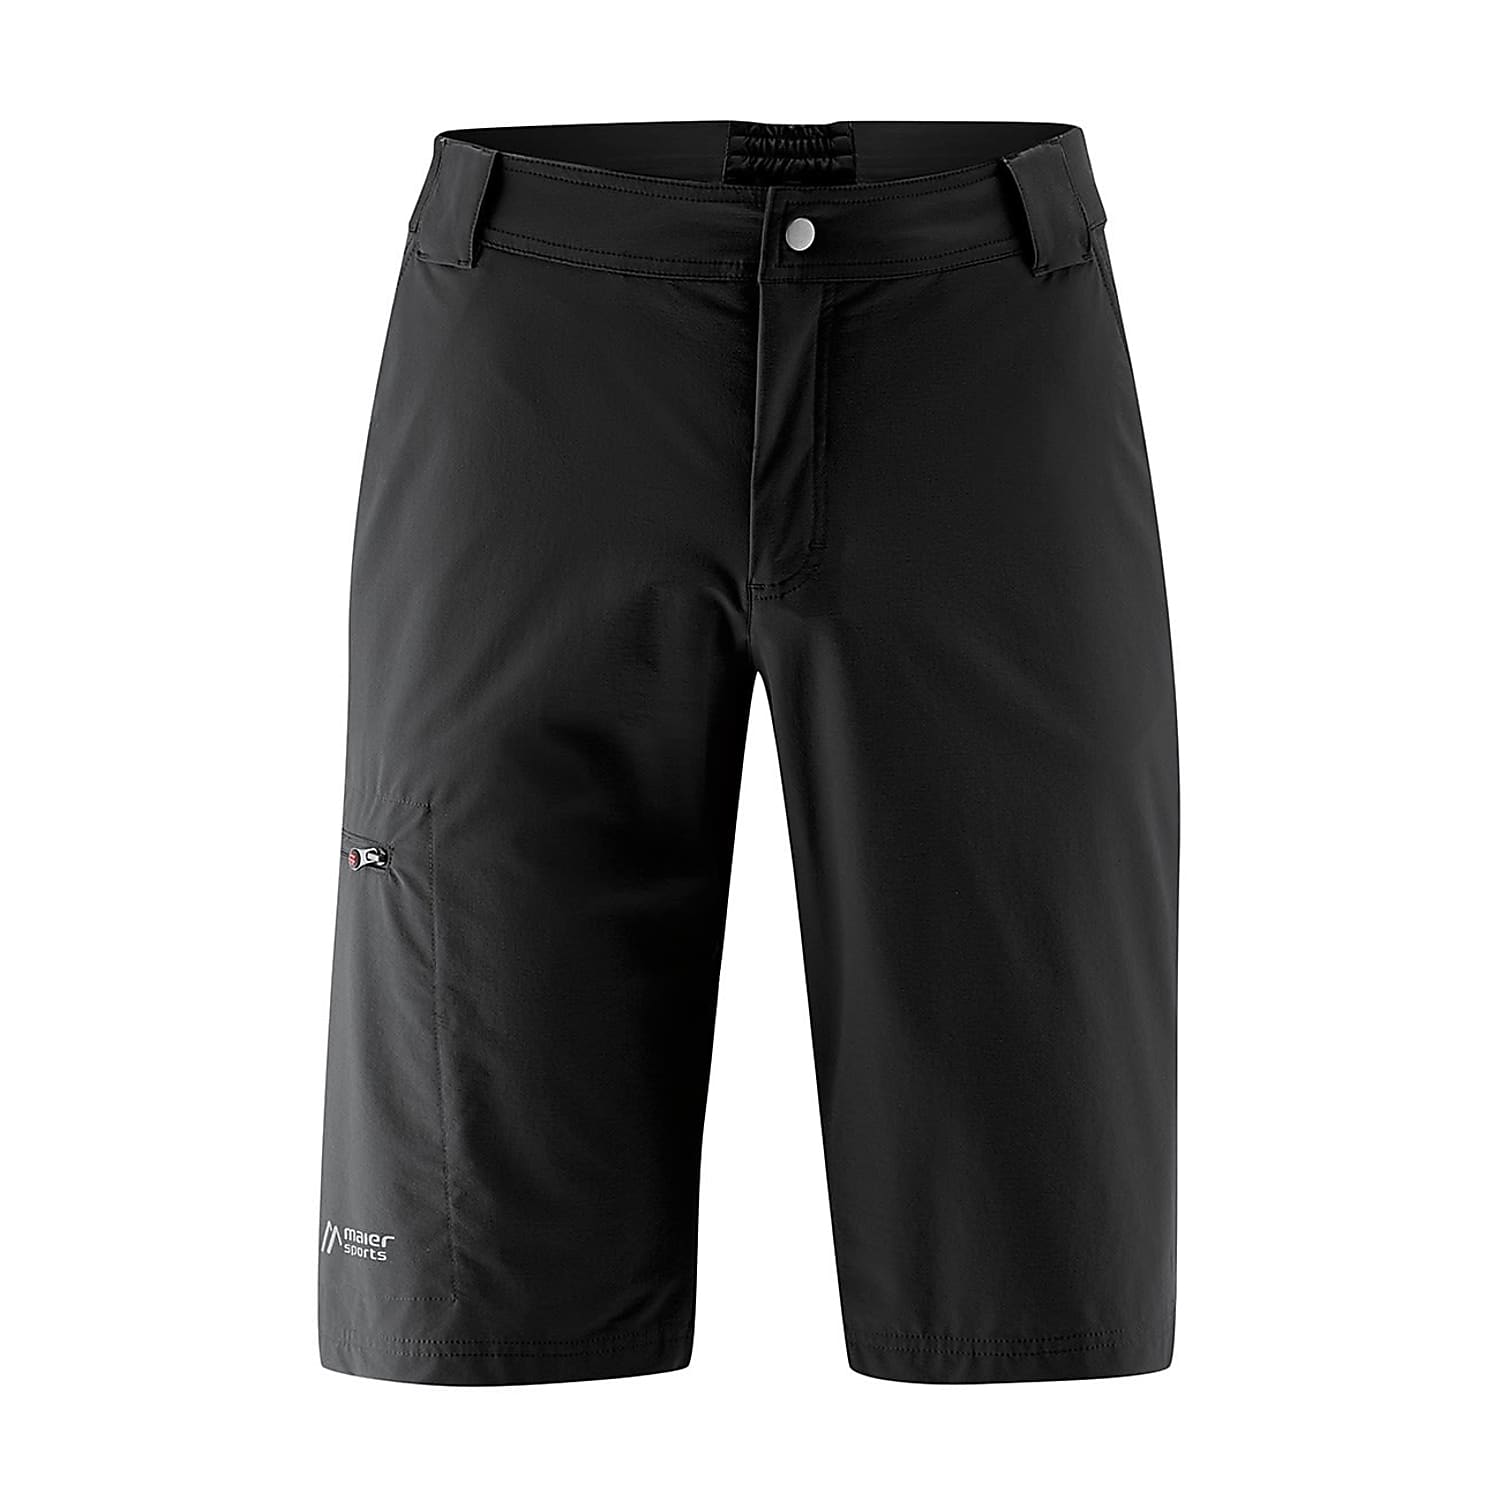 SHORT, NORIT Black Maier - Sports M cheap and shipping Fast